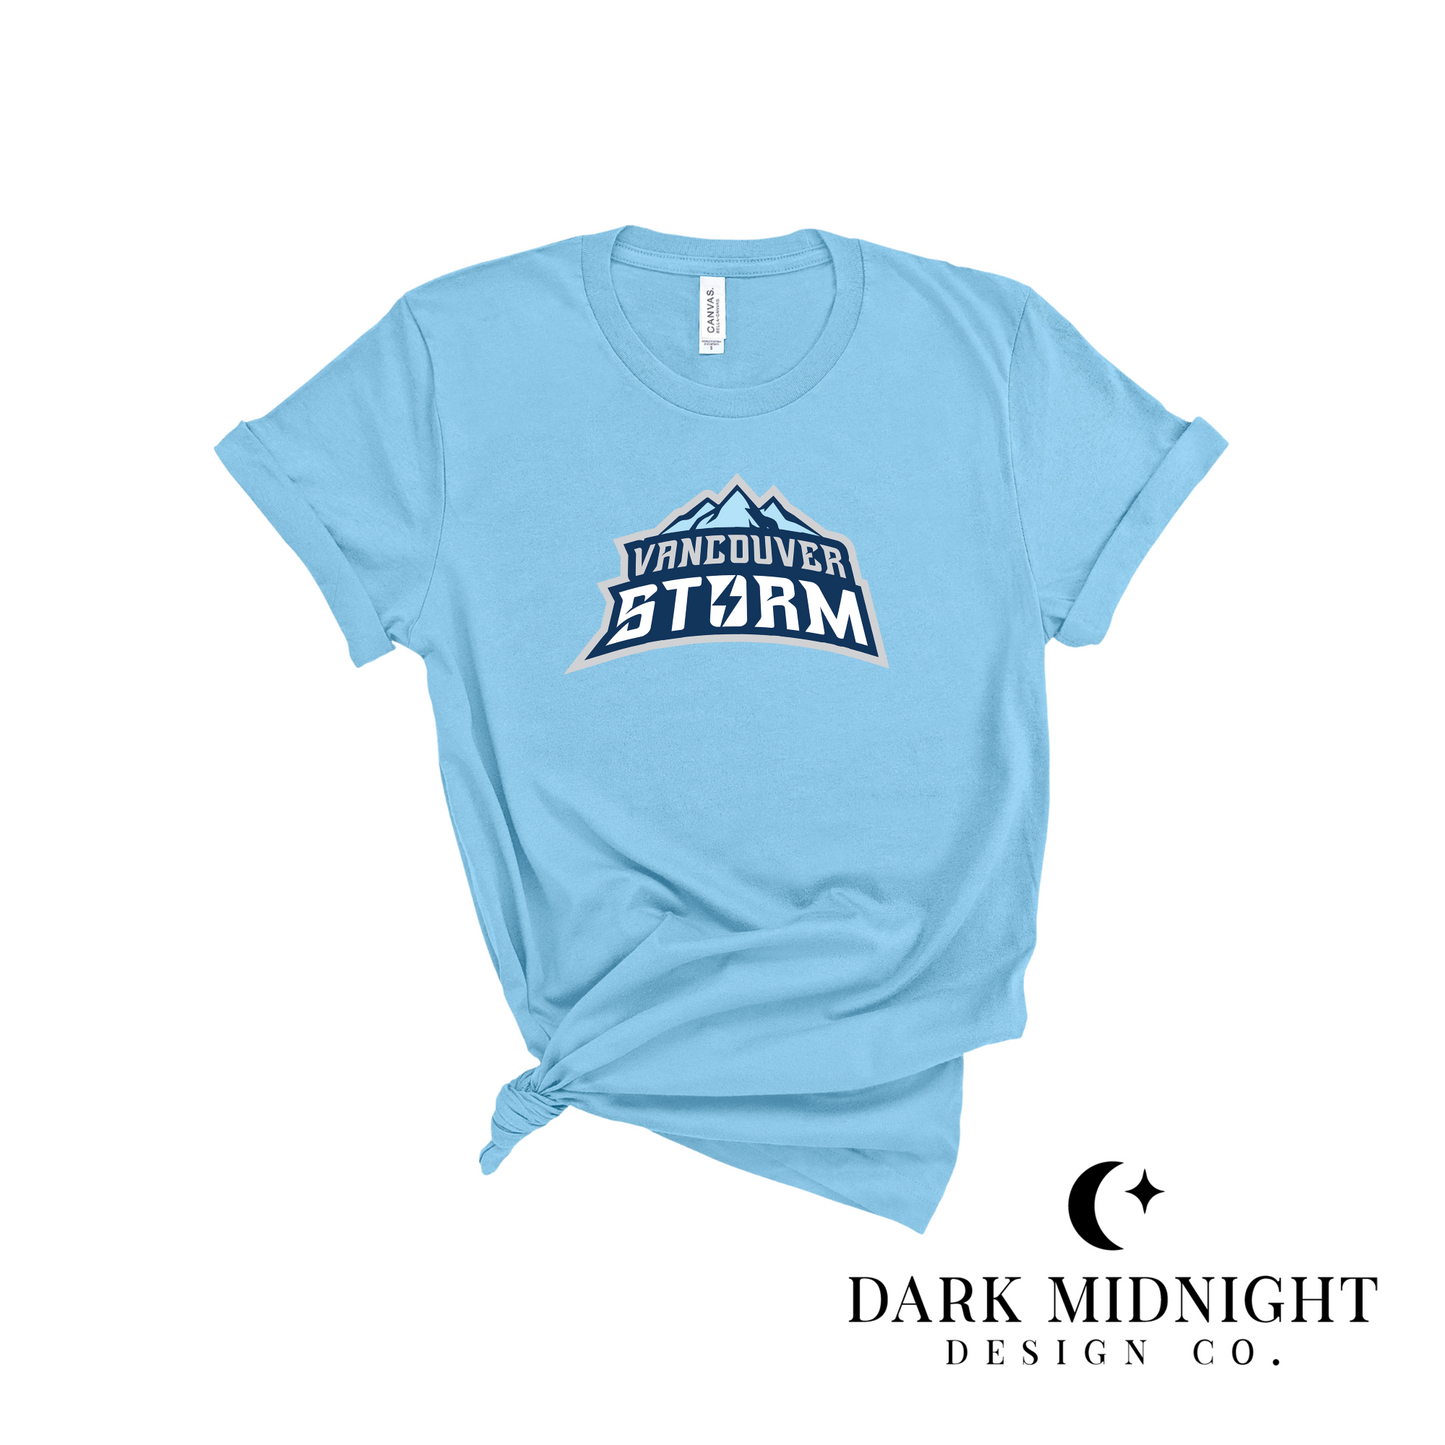 Vancouver Storm Logo Tee - Officially Licensed Vancouver Storm Series